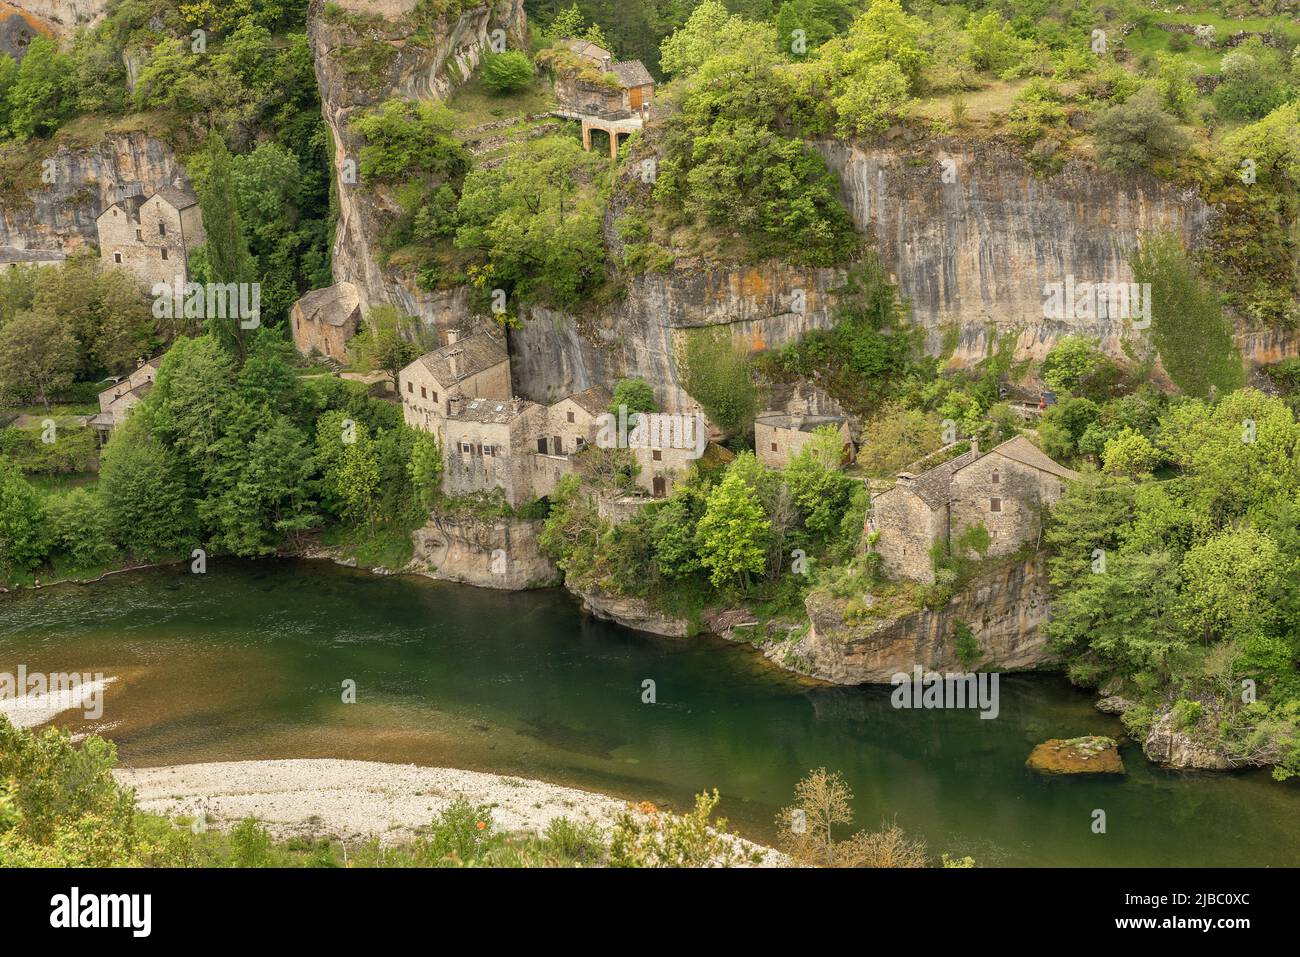 Village of Castelbouc in the Tarn Gorges, France Stock Photo